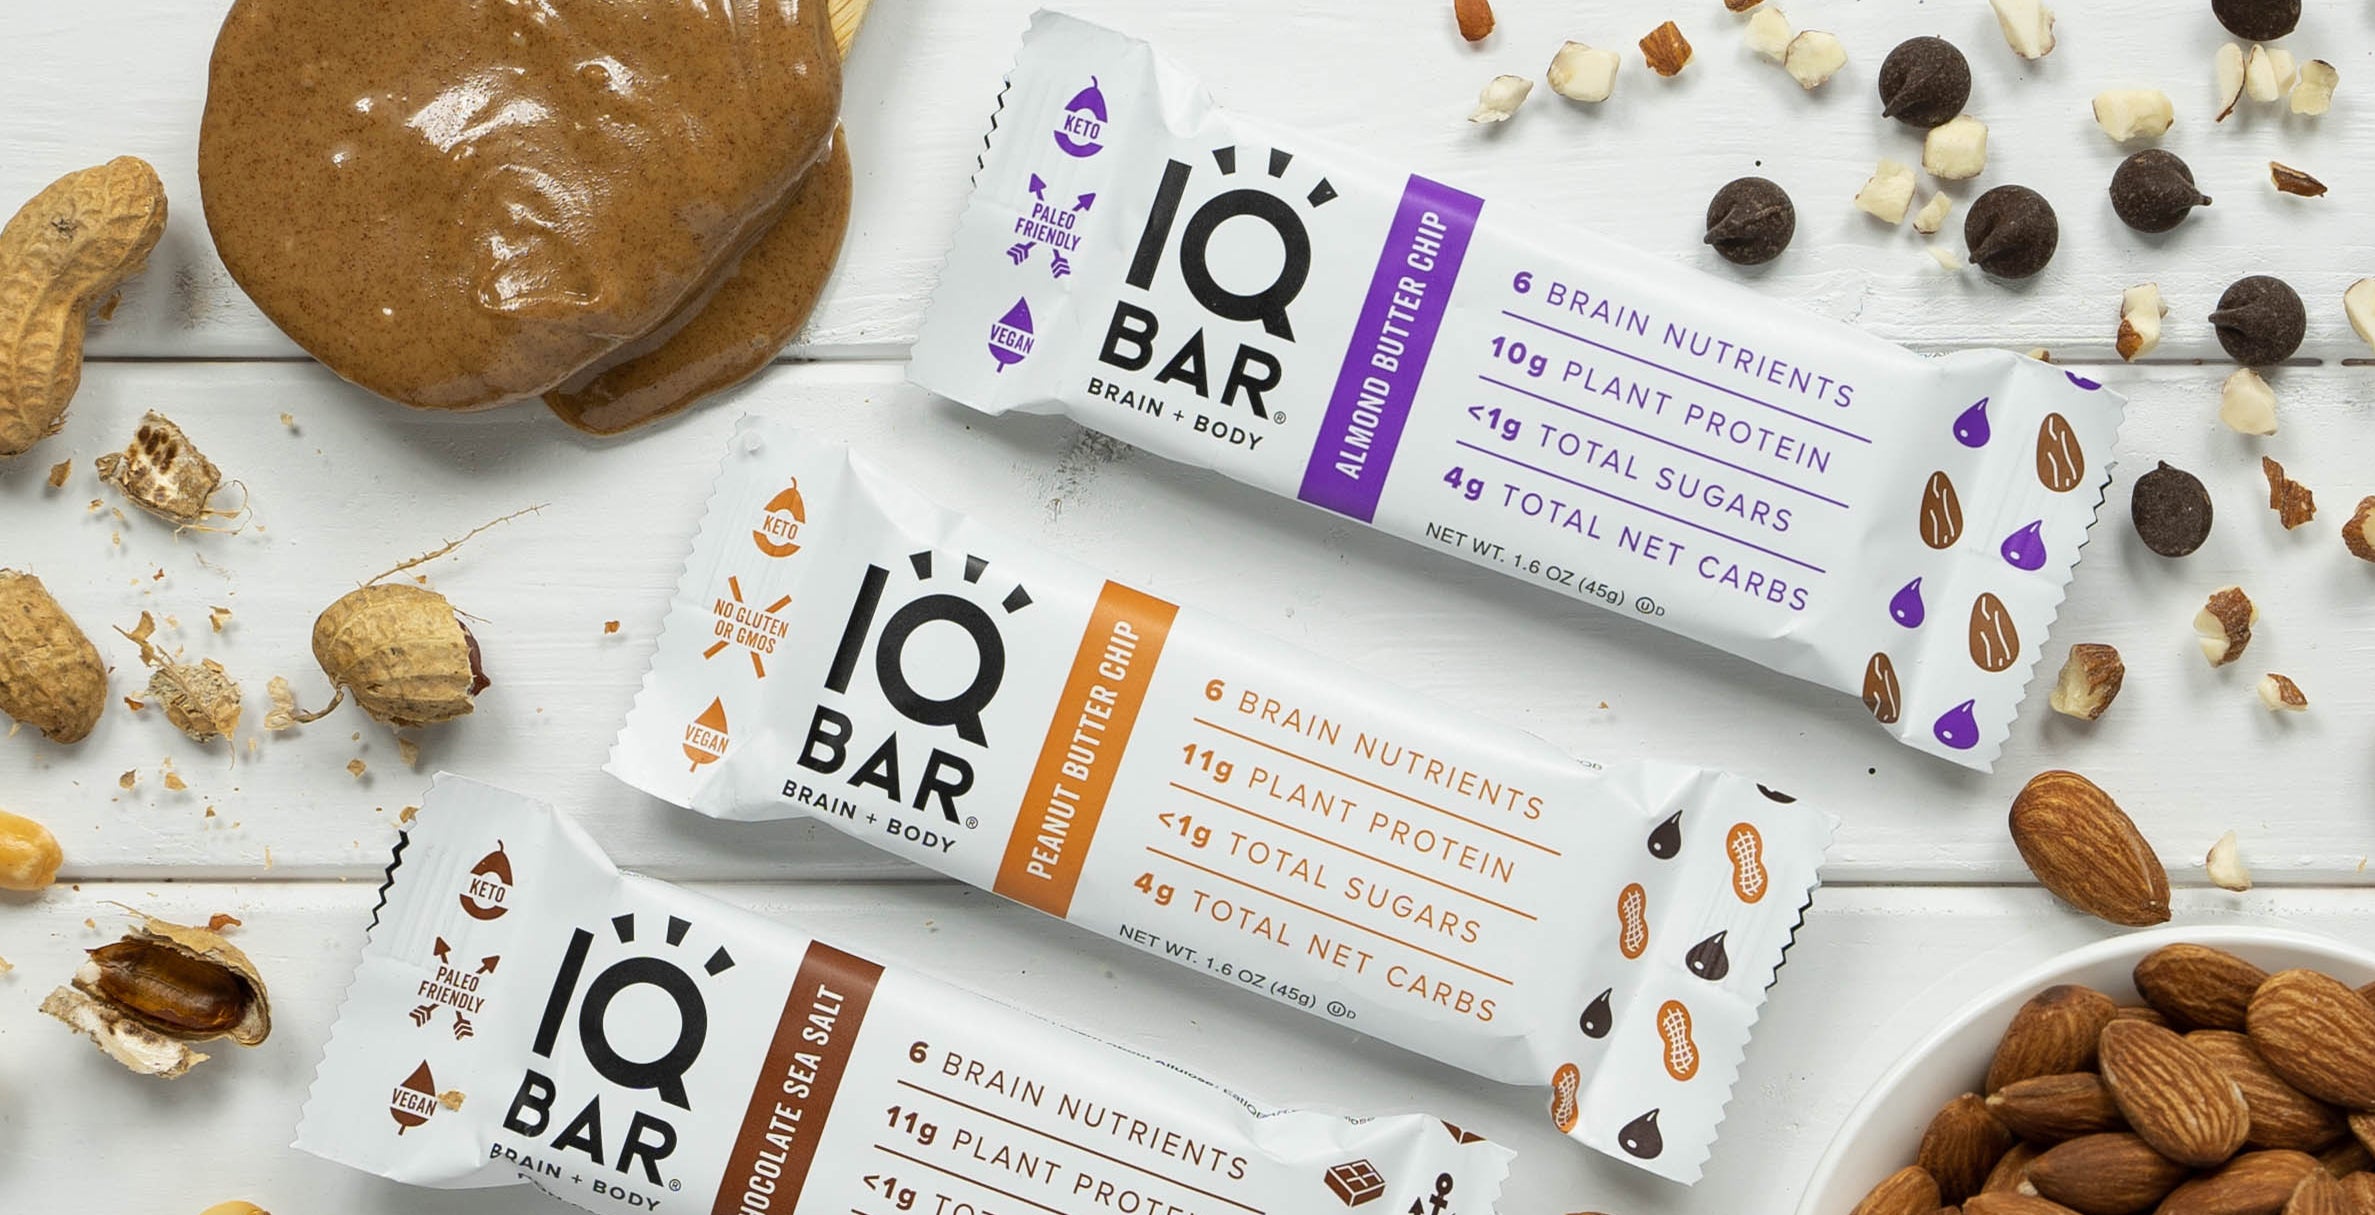 IQBAR Closes $1 Million Seed Round Funding and Introduces New-and-Improved Recipes